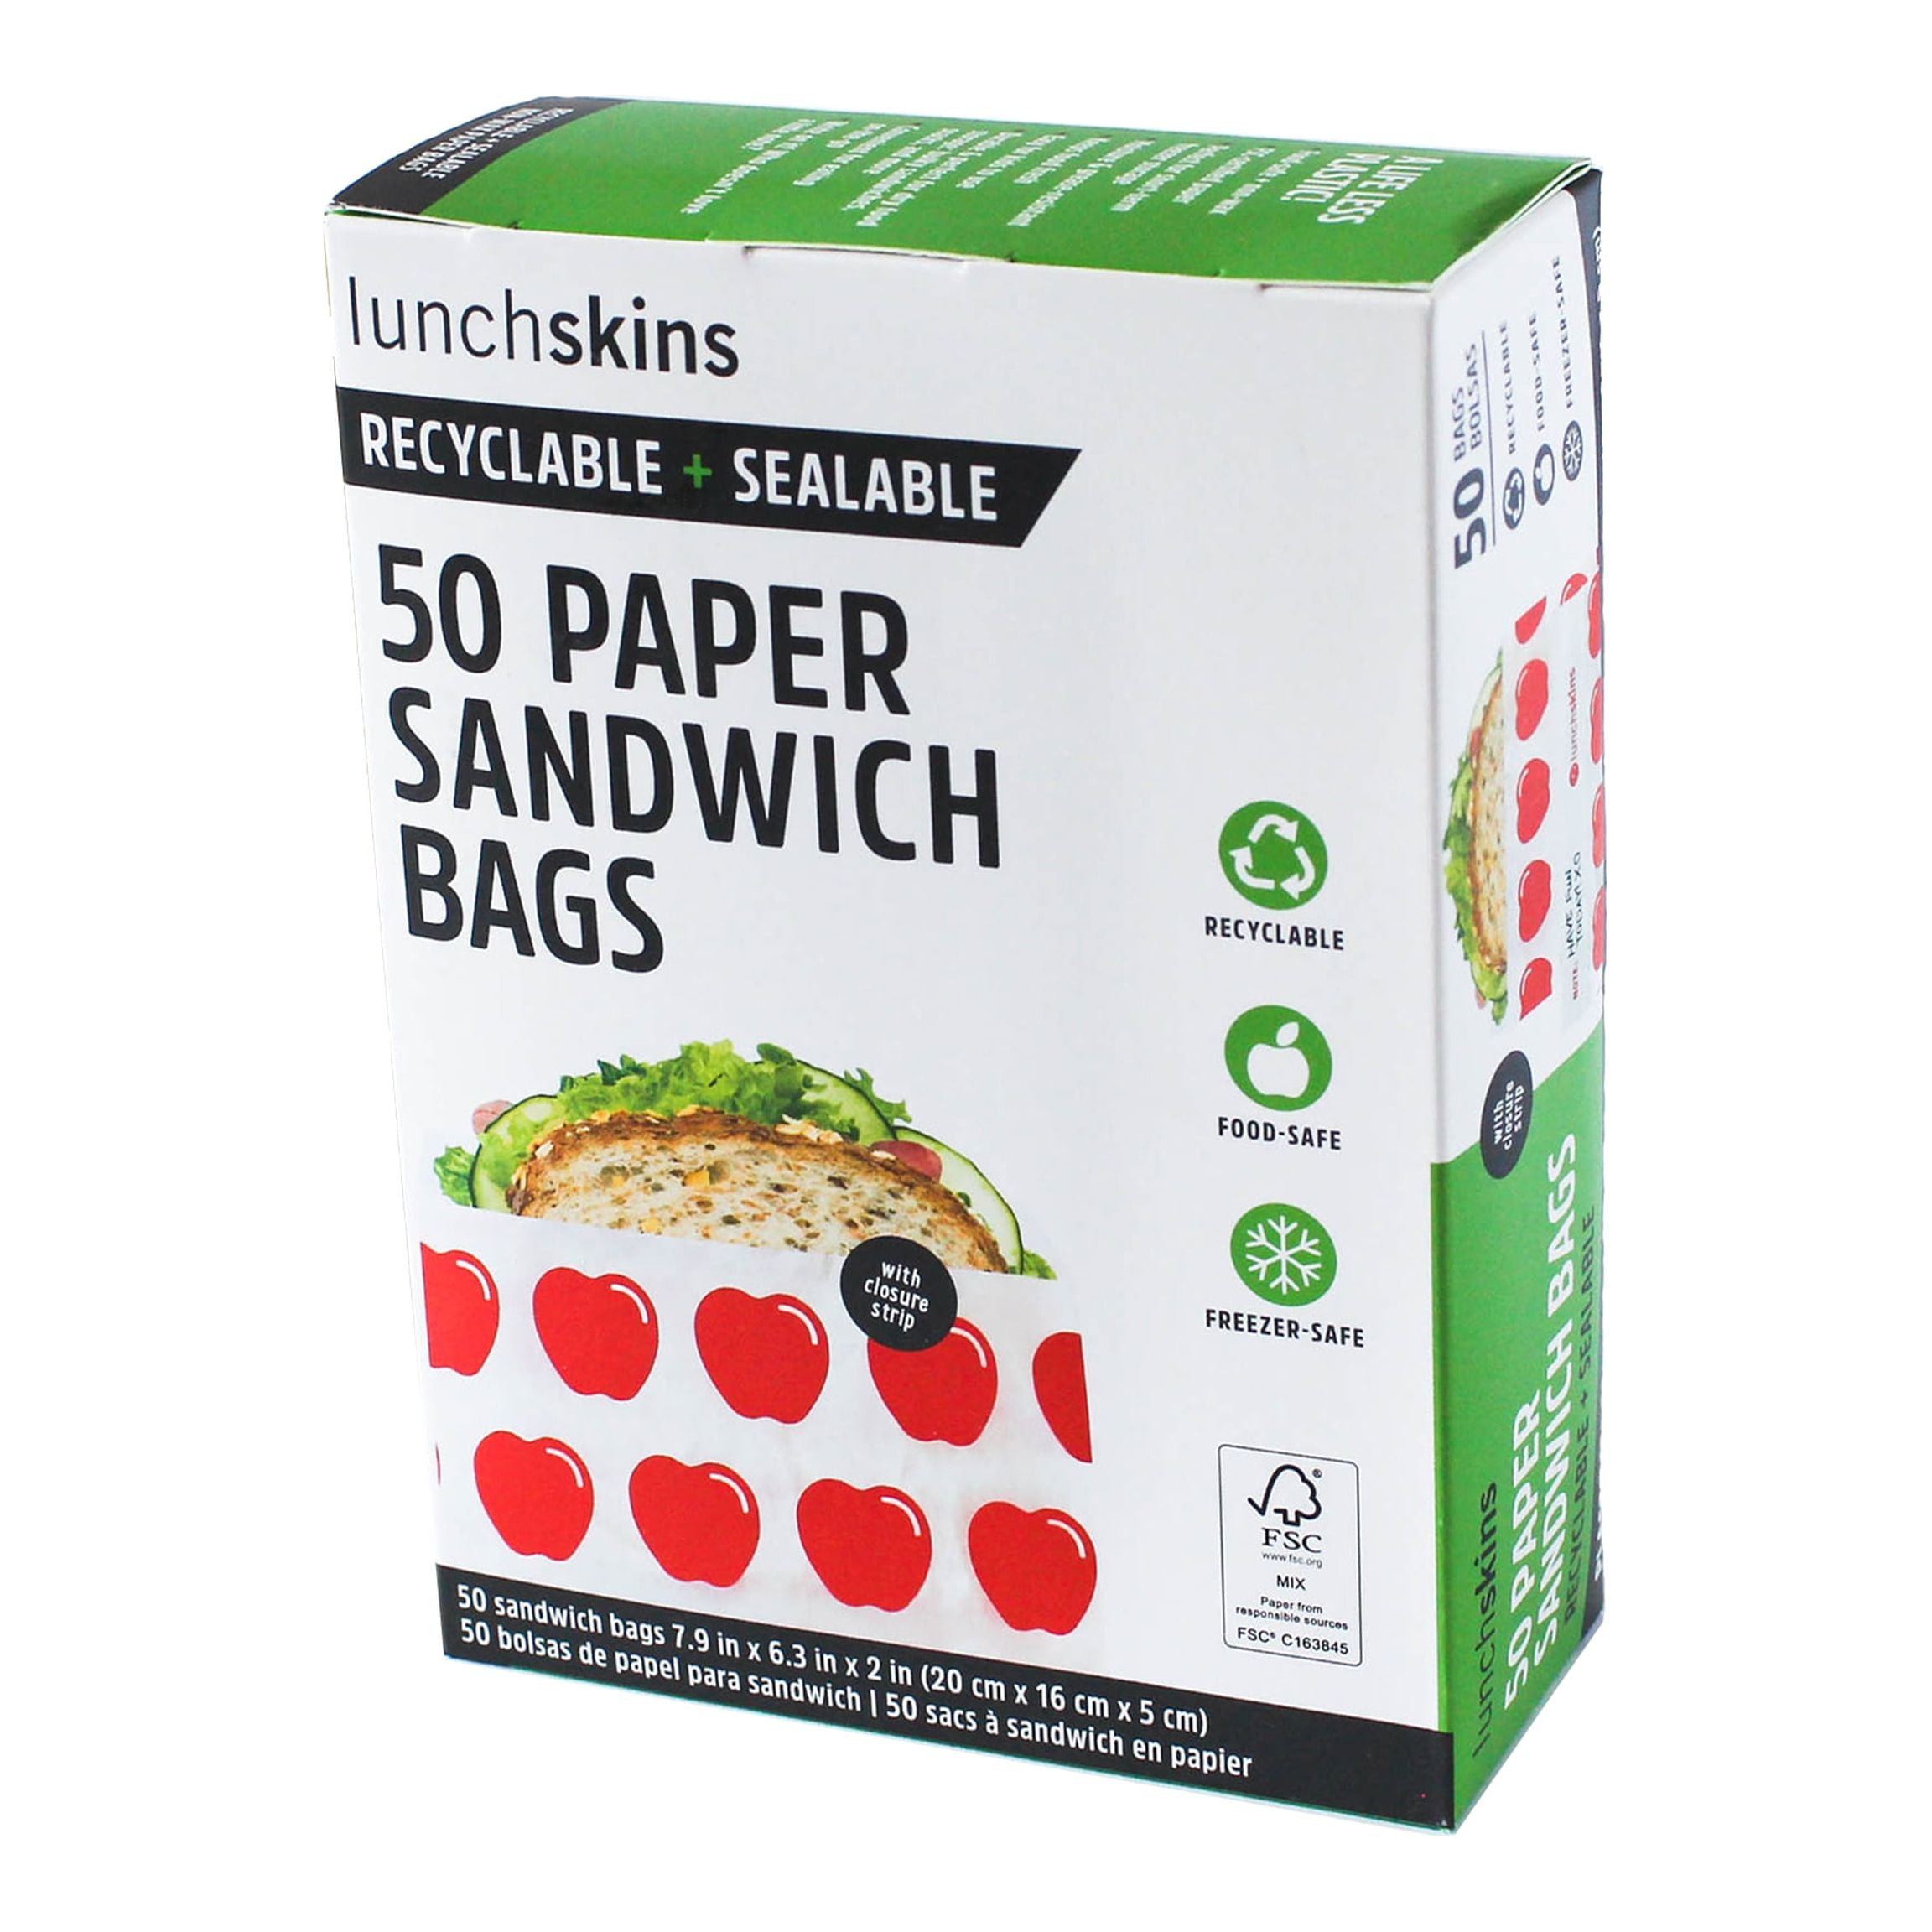 Lunchskins Recyclable & Sealable Food Storage Sandwich Bags Apple, 50 ...